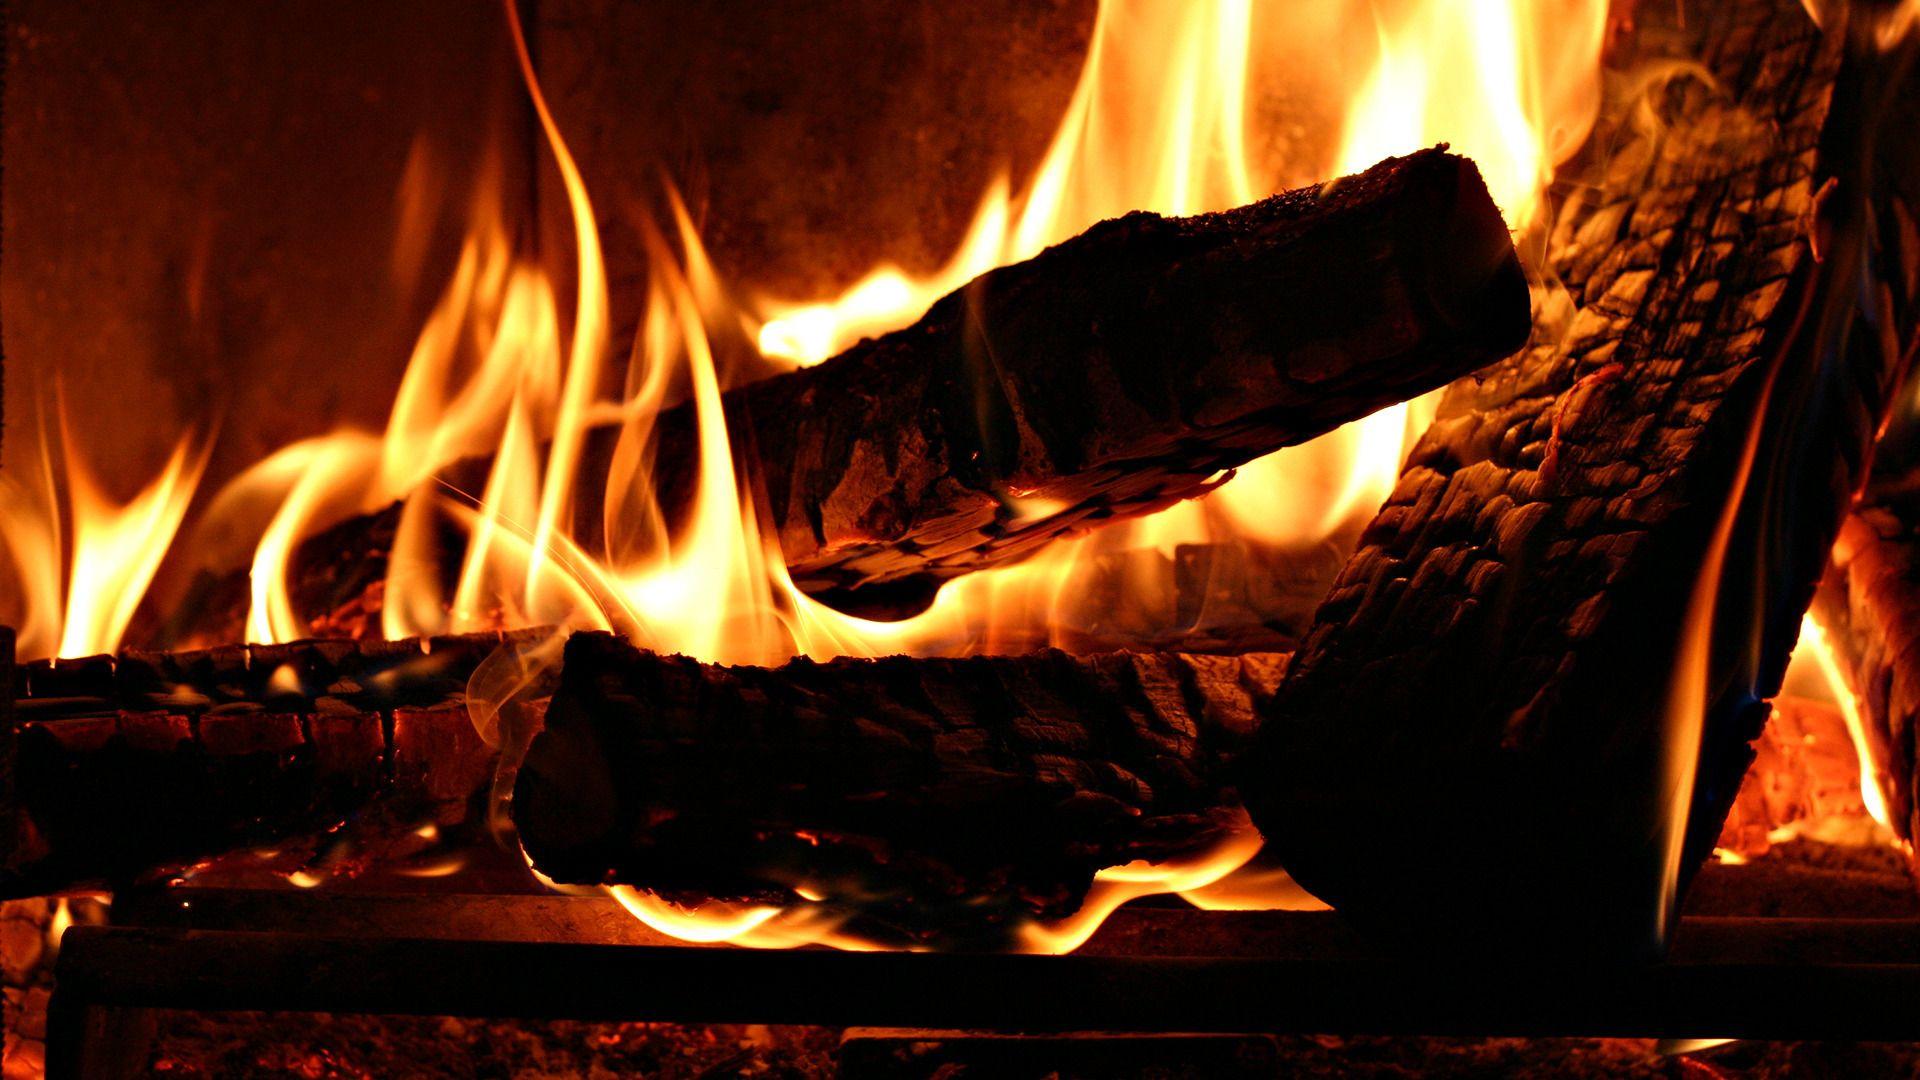 Cozy Fireplace Wallpapers - Top Free Cozy Fireplace Backgrounds